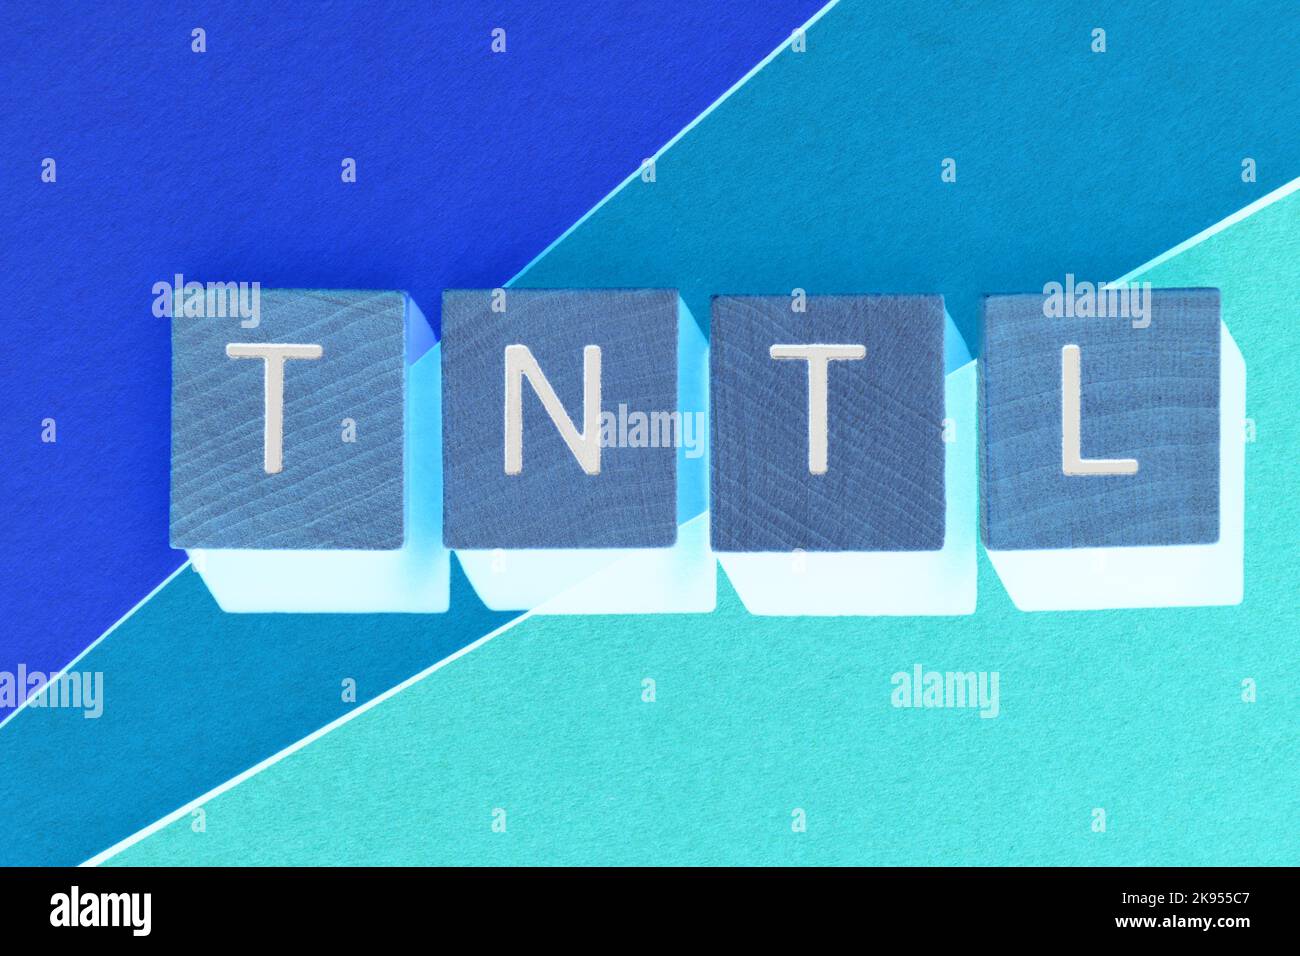 TNTL, abbreviation for Trying Not to Laugh in wooden alphabet letters isolated on blue background Stock Photo